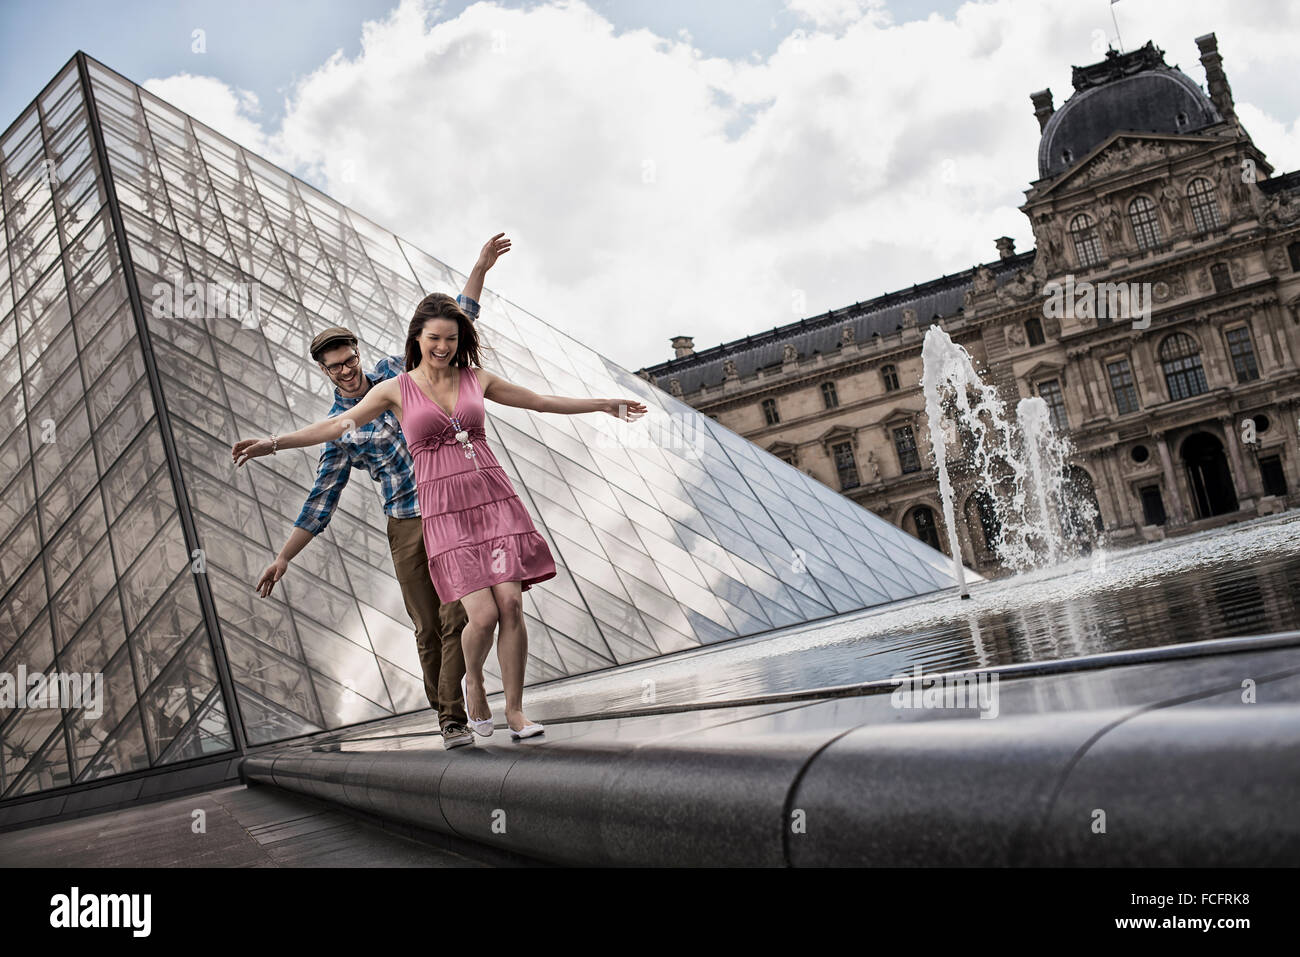 A couple in the courtyard of the Louvre museum, by the large glass pyramid. Water jets and shallow pool. Stock Photo